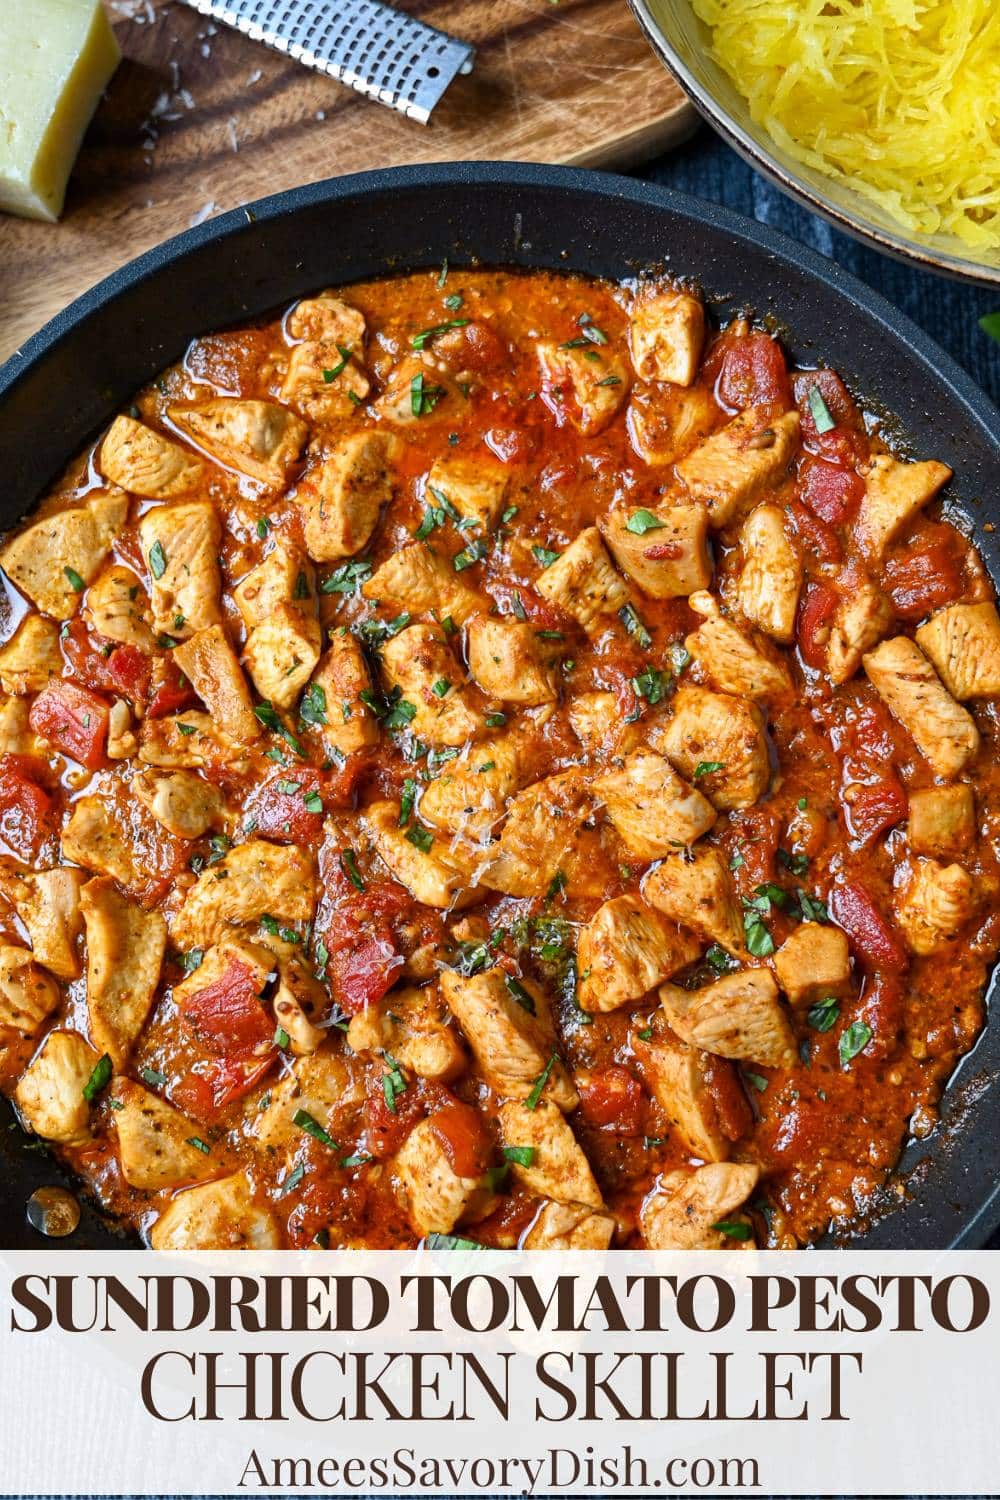 This easy one-skillet chicken recipe is made with boneless chicken simmered in a flavorful sundried tomato pesto sauce. Ready in 30 minutes! Optional cream addition for pasta. via @Ameessavorydish